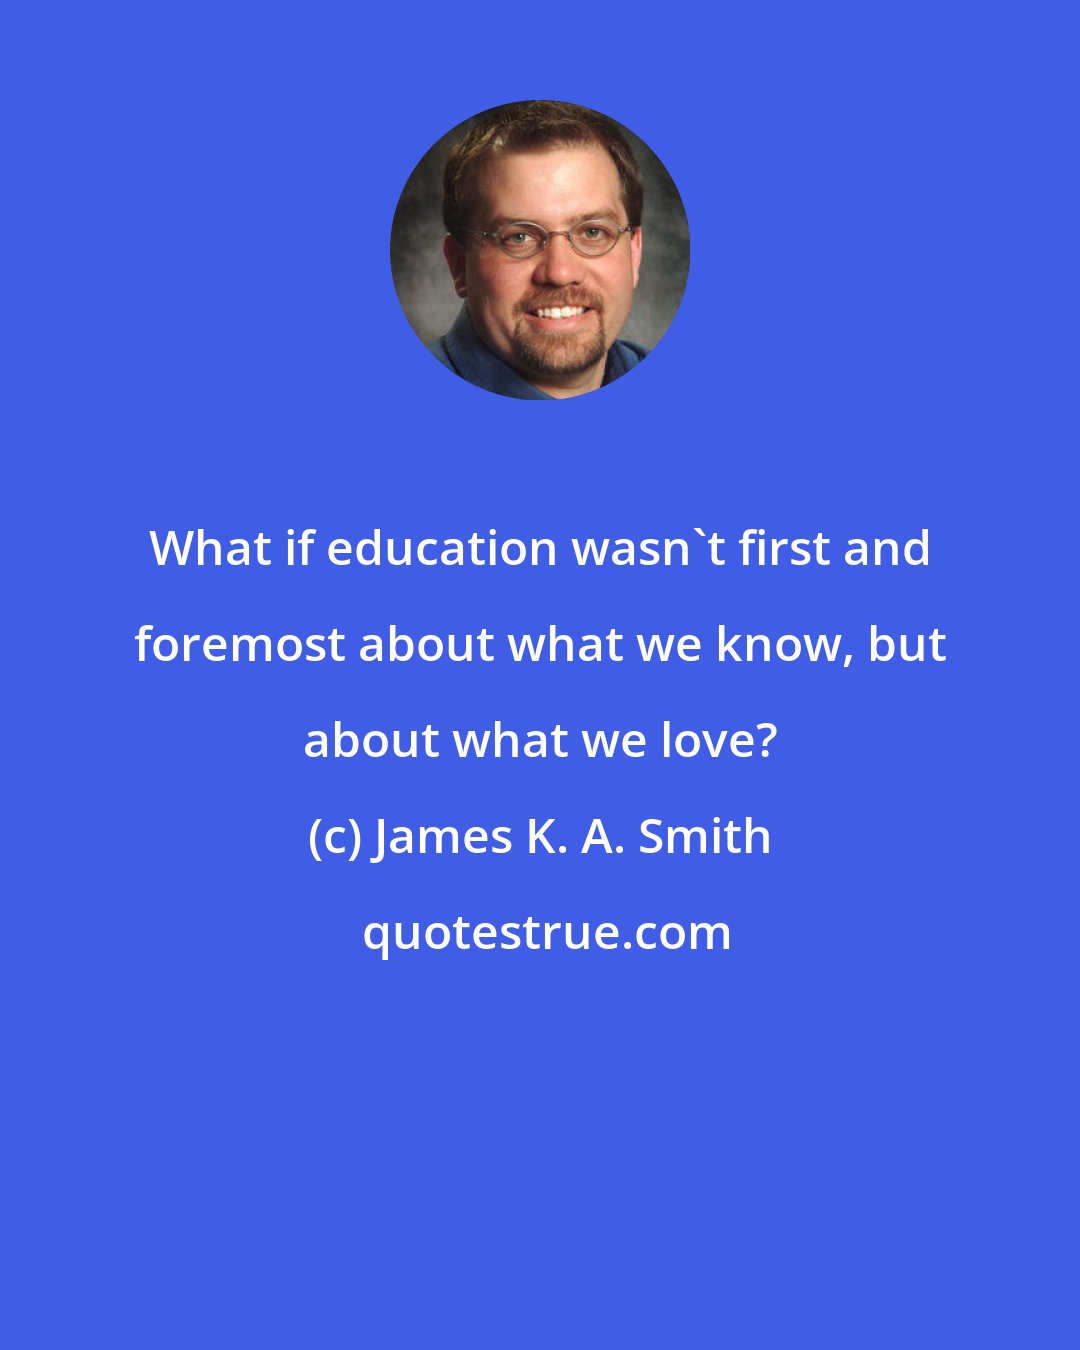 James K. A. Smith: What if education wasn't first and foremost about what we know, but about what we love?